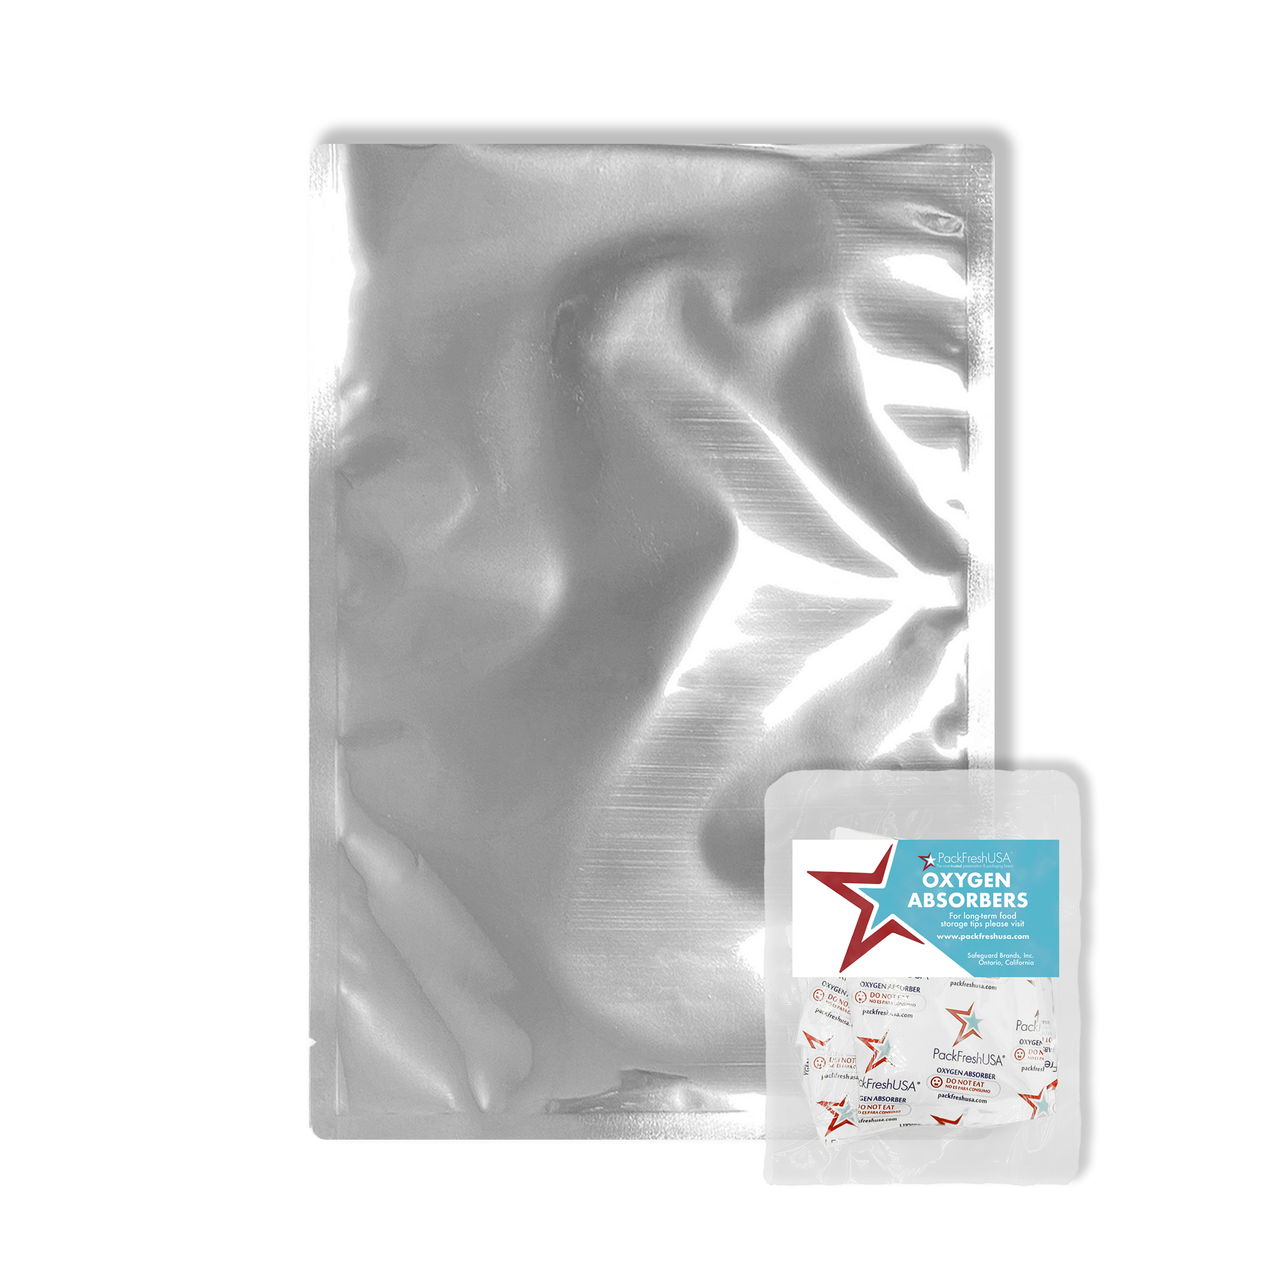 Two-Quart 7 Mil Seal-Top Premium Gusset Mylar Bags and Oxygen